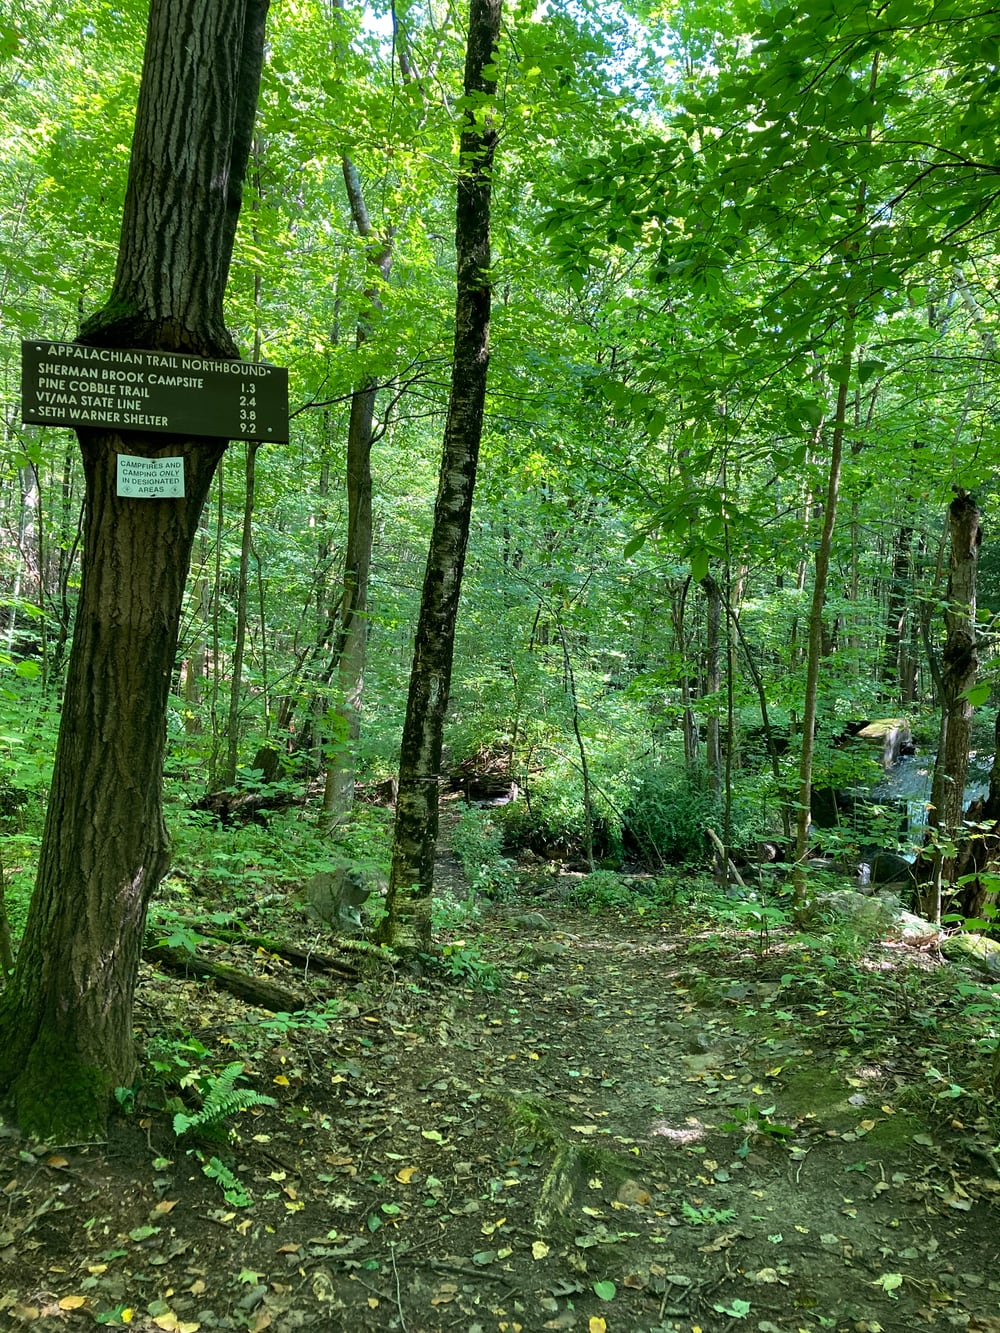 Sign showing distances on the trail